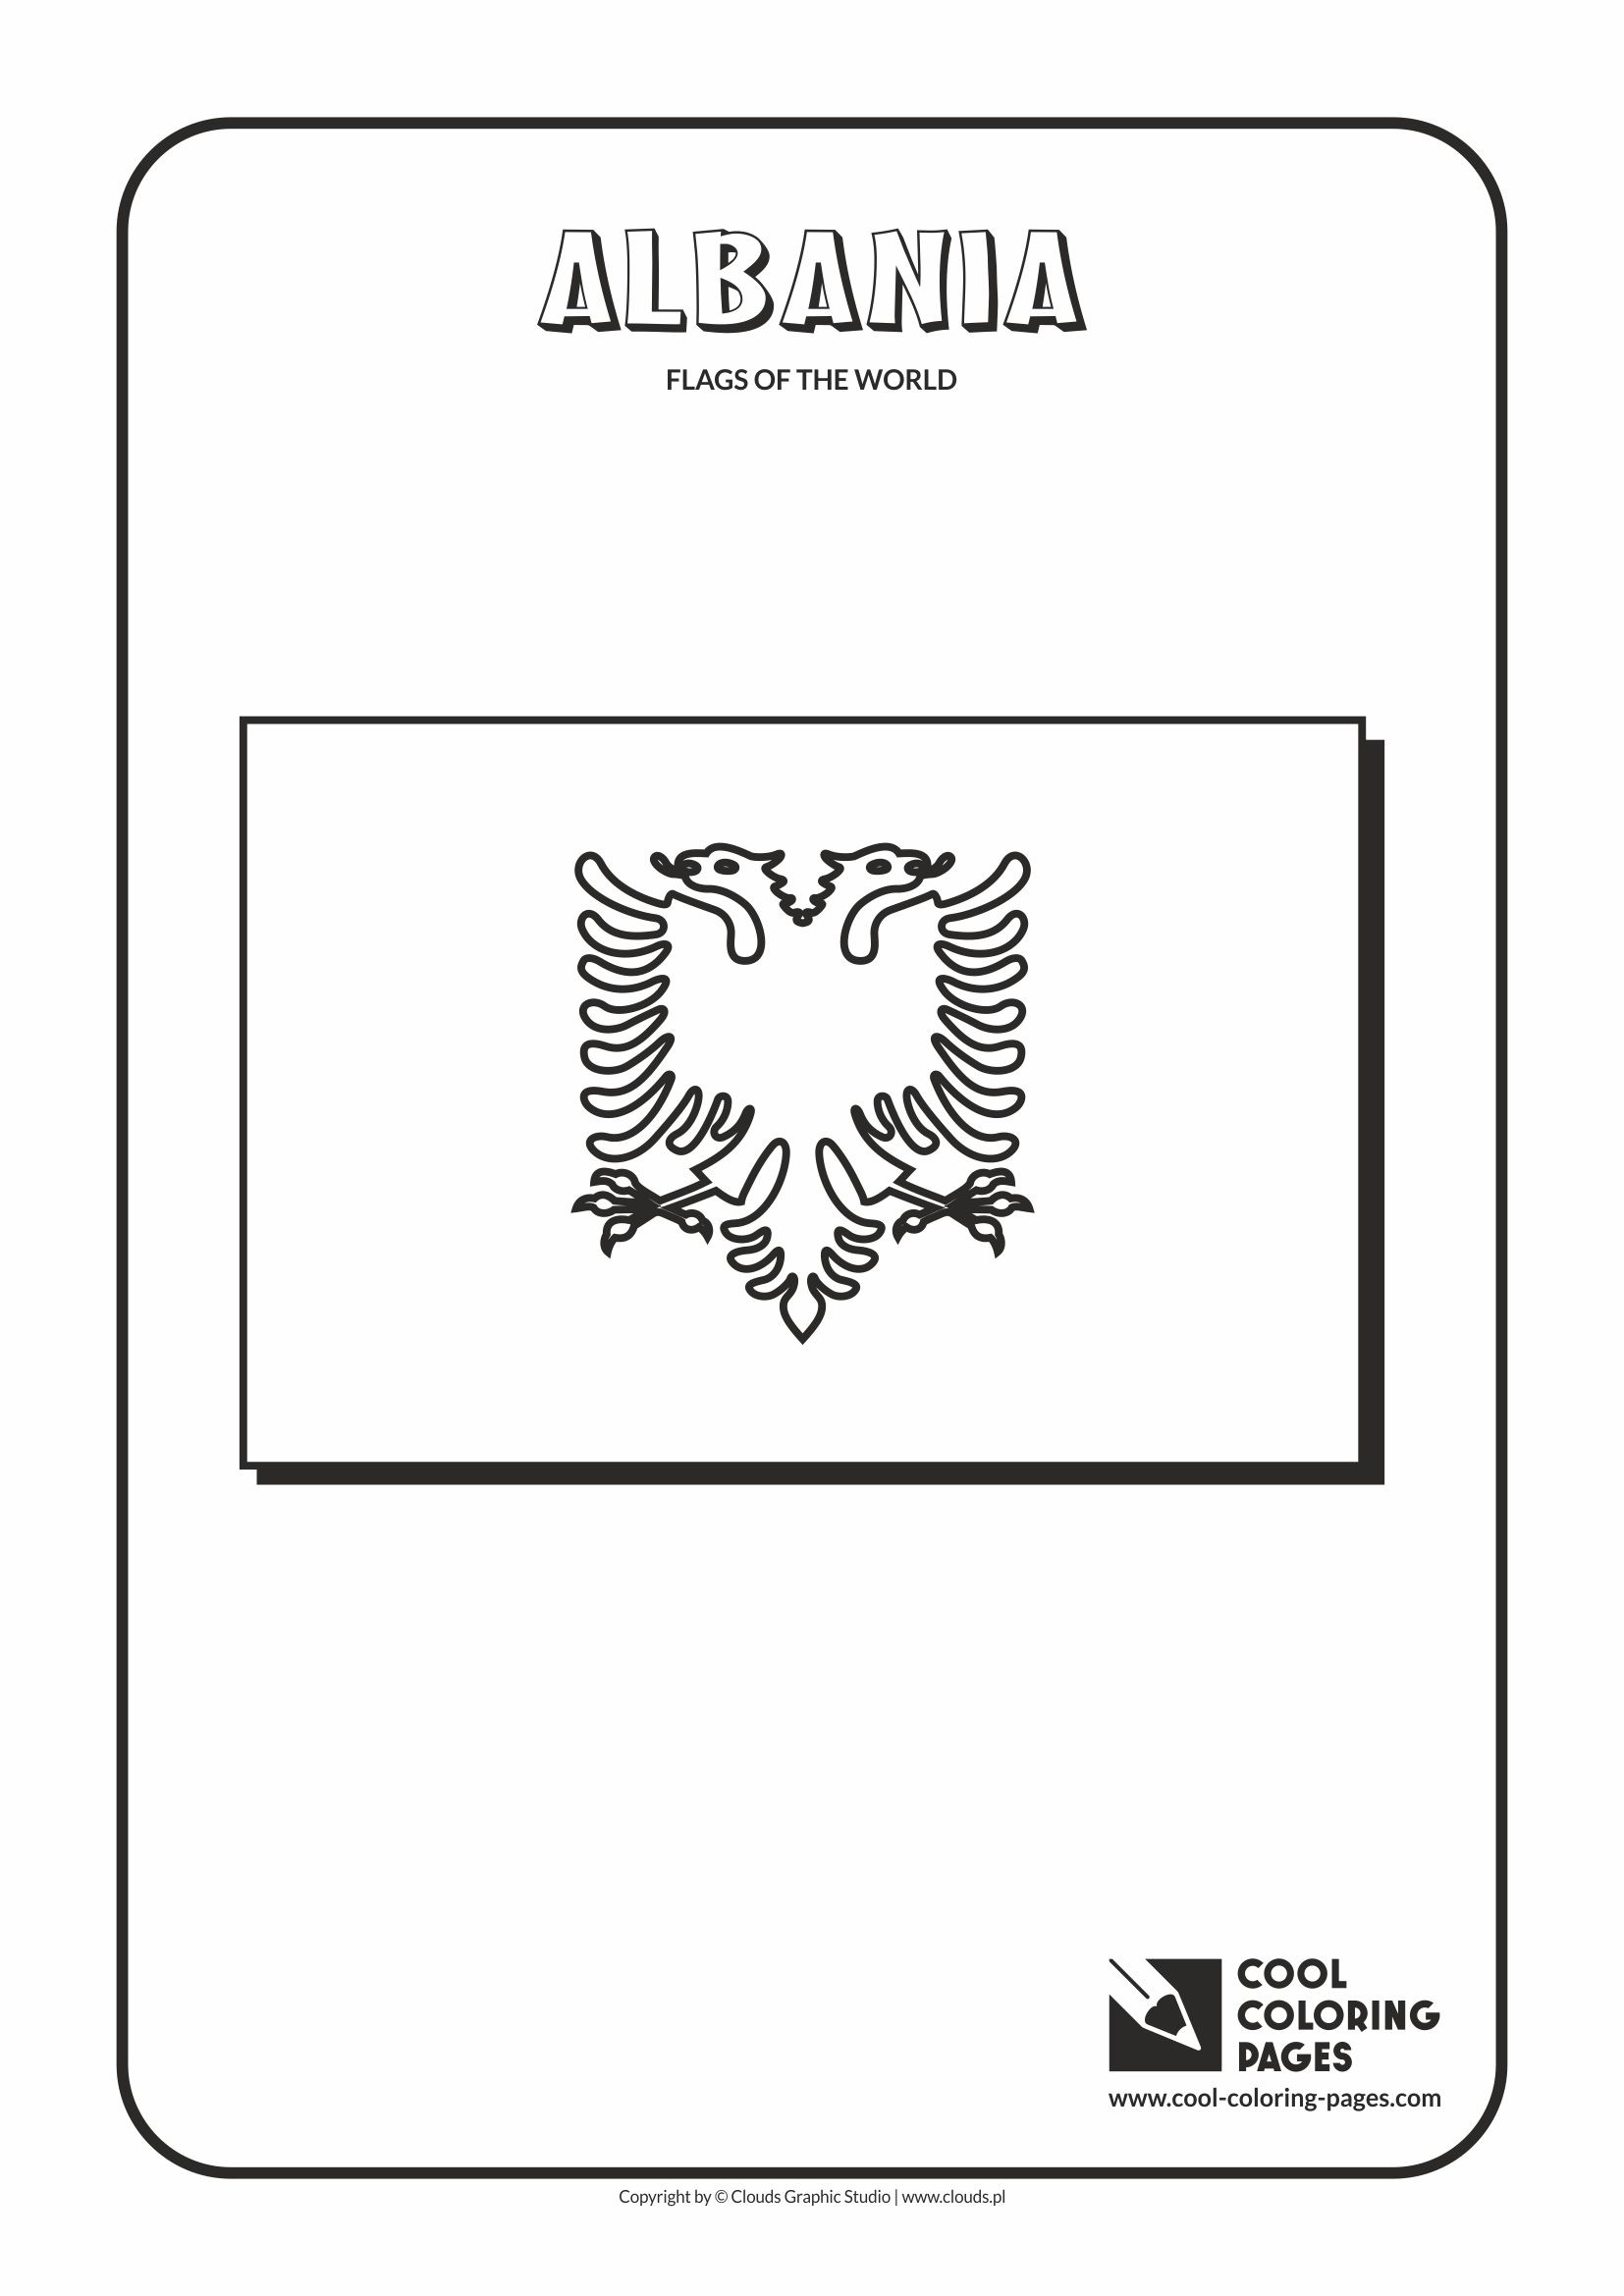 Cool Coloring Pages - Flags of the world / Albania flag